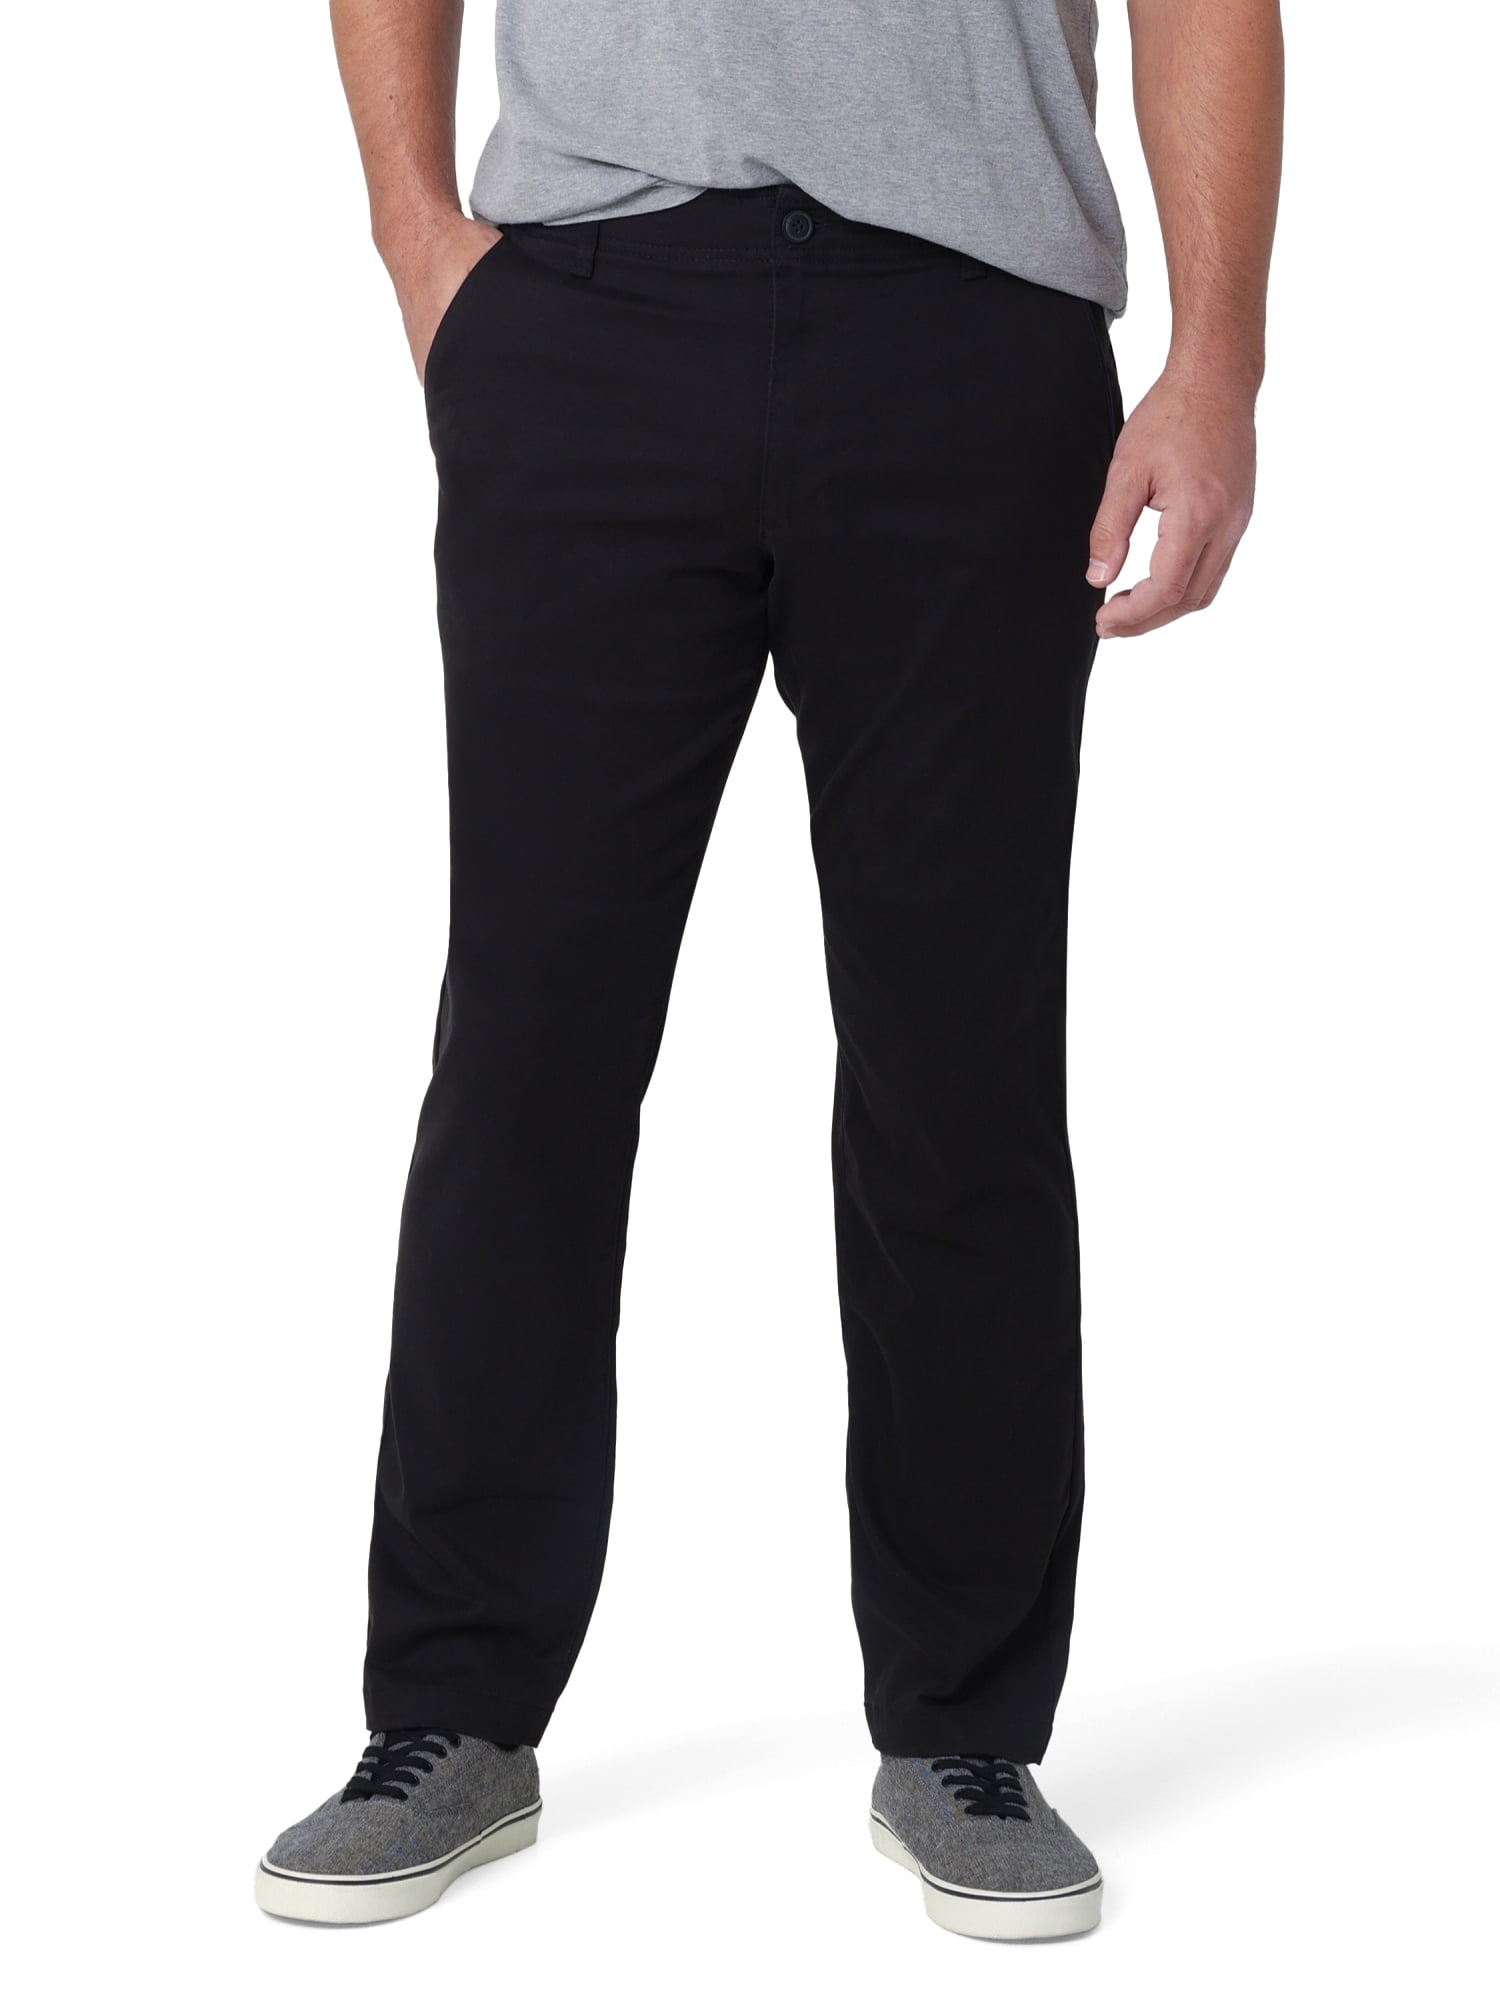 Denim & Co. Active Tall Duo Stretch Pant with Side Pocket NAVY, TALL X-LARGE